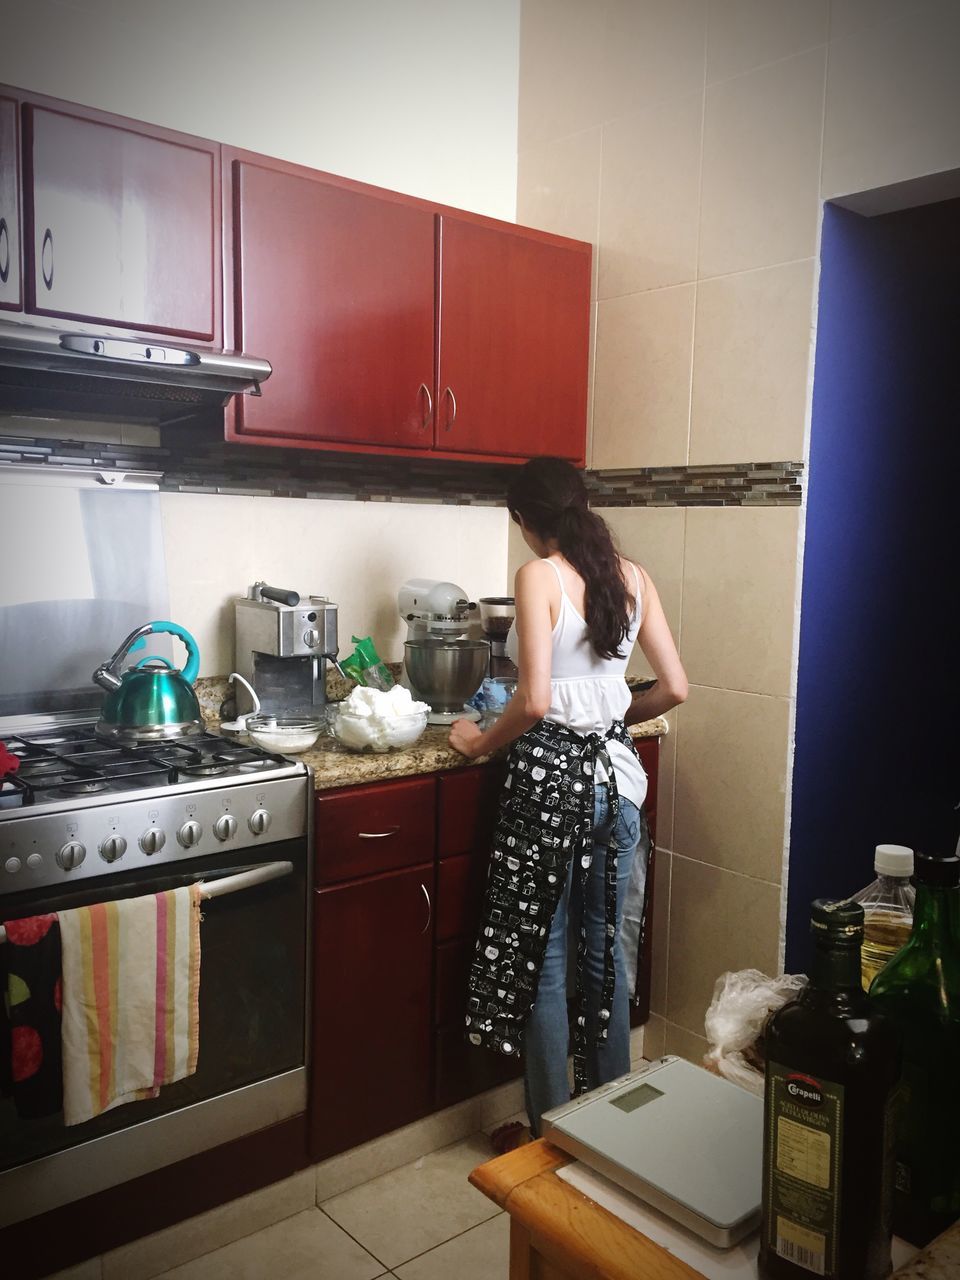 domestic kitchen, kitchen, rear view, one person, domestic room, real people, standing, indoors, cabinet, food and drink, leisure activity, lifestyles, refrigerator, food, full length, night, young adult, people